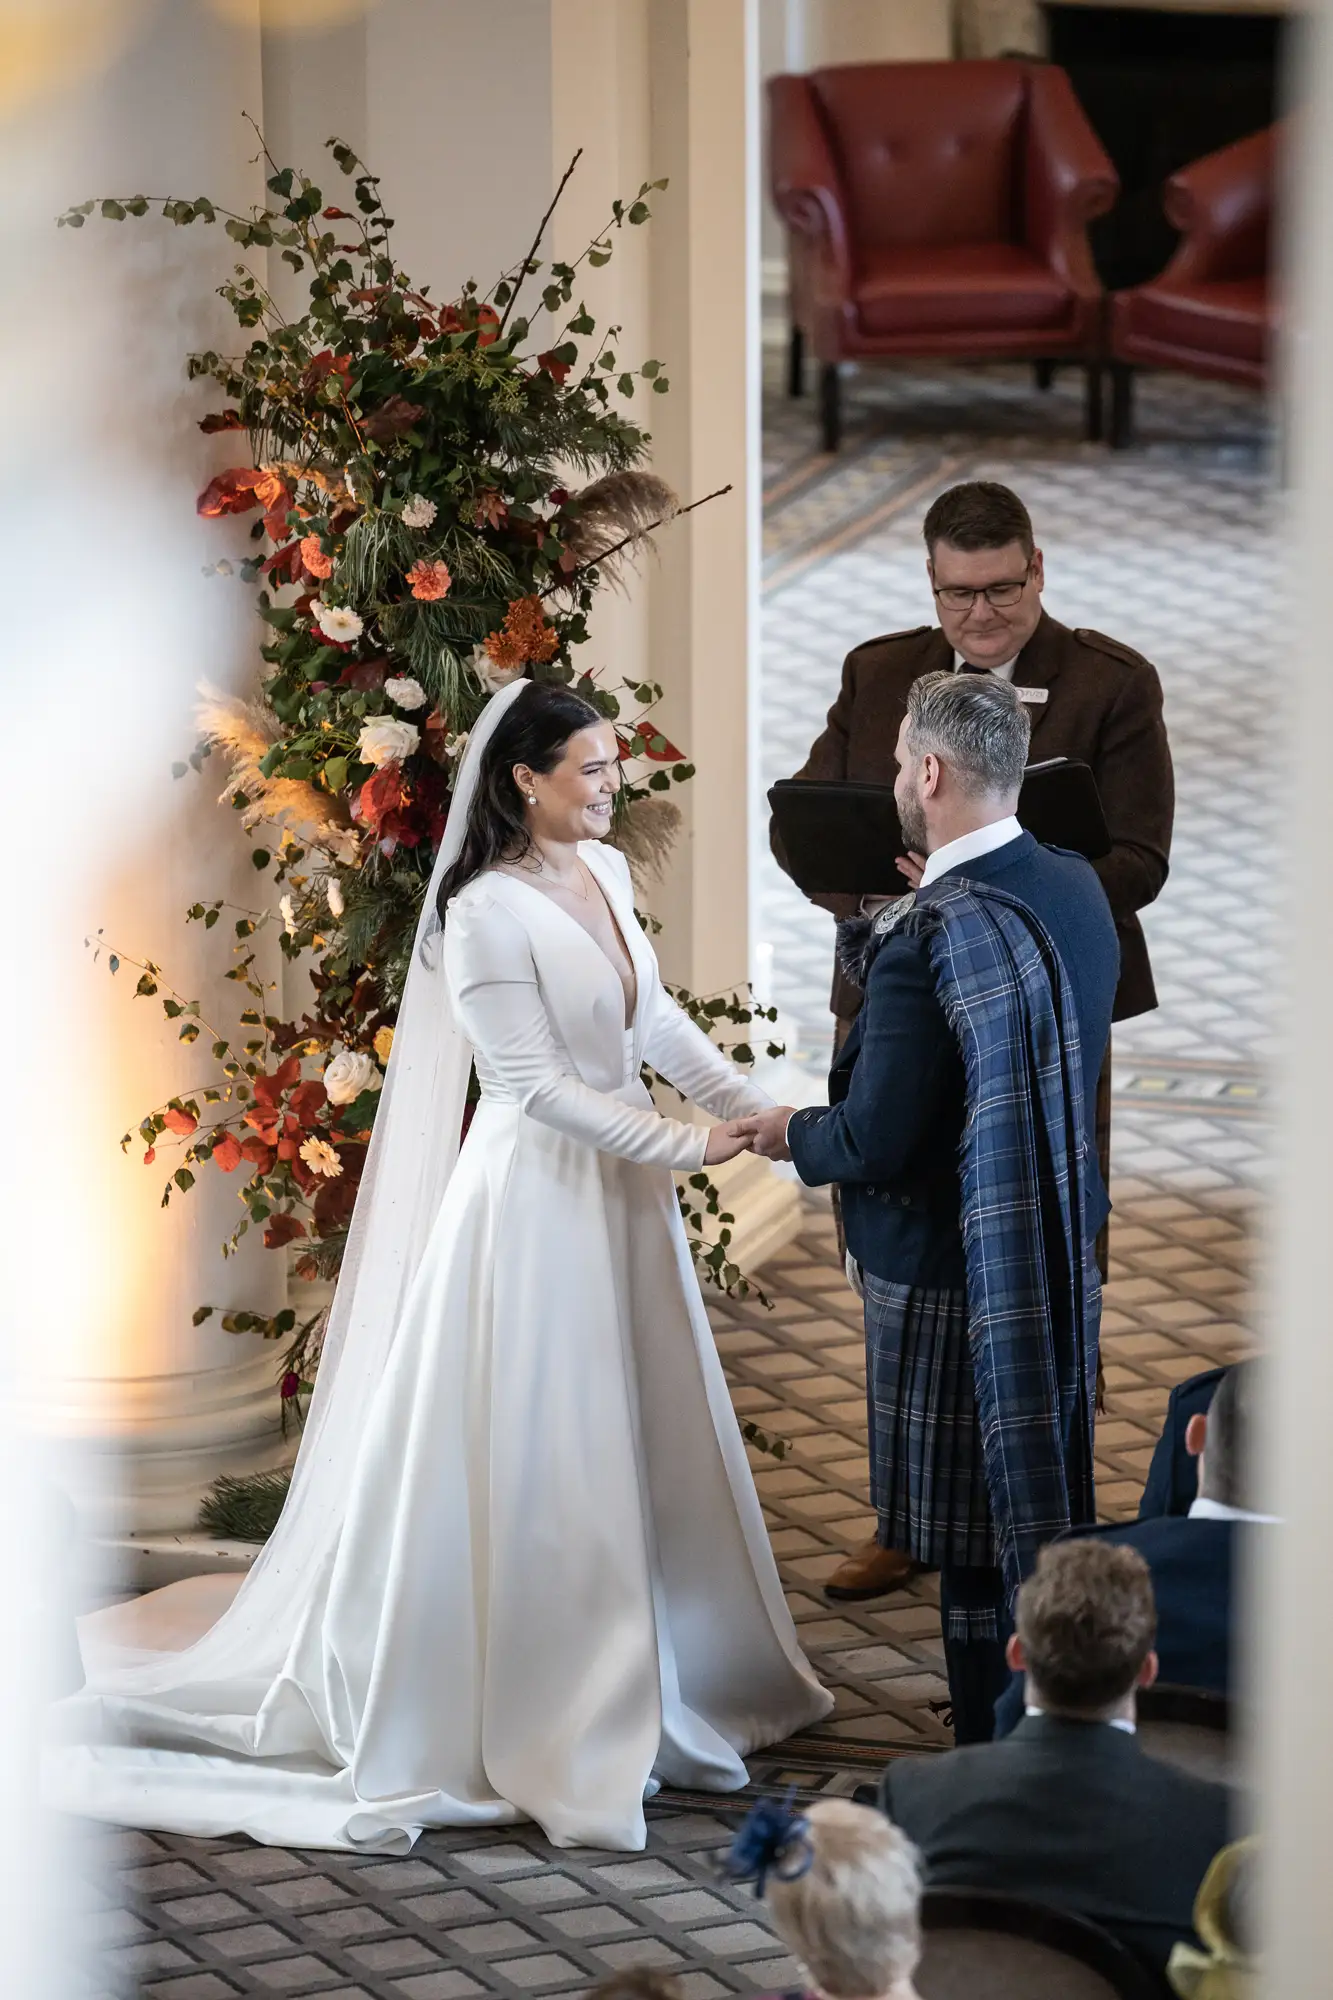 A bride in a white dress and a groom in a plaid kilt exchanging vows at their wedding ceremony, with an officiant and floral decorations in the background.